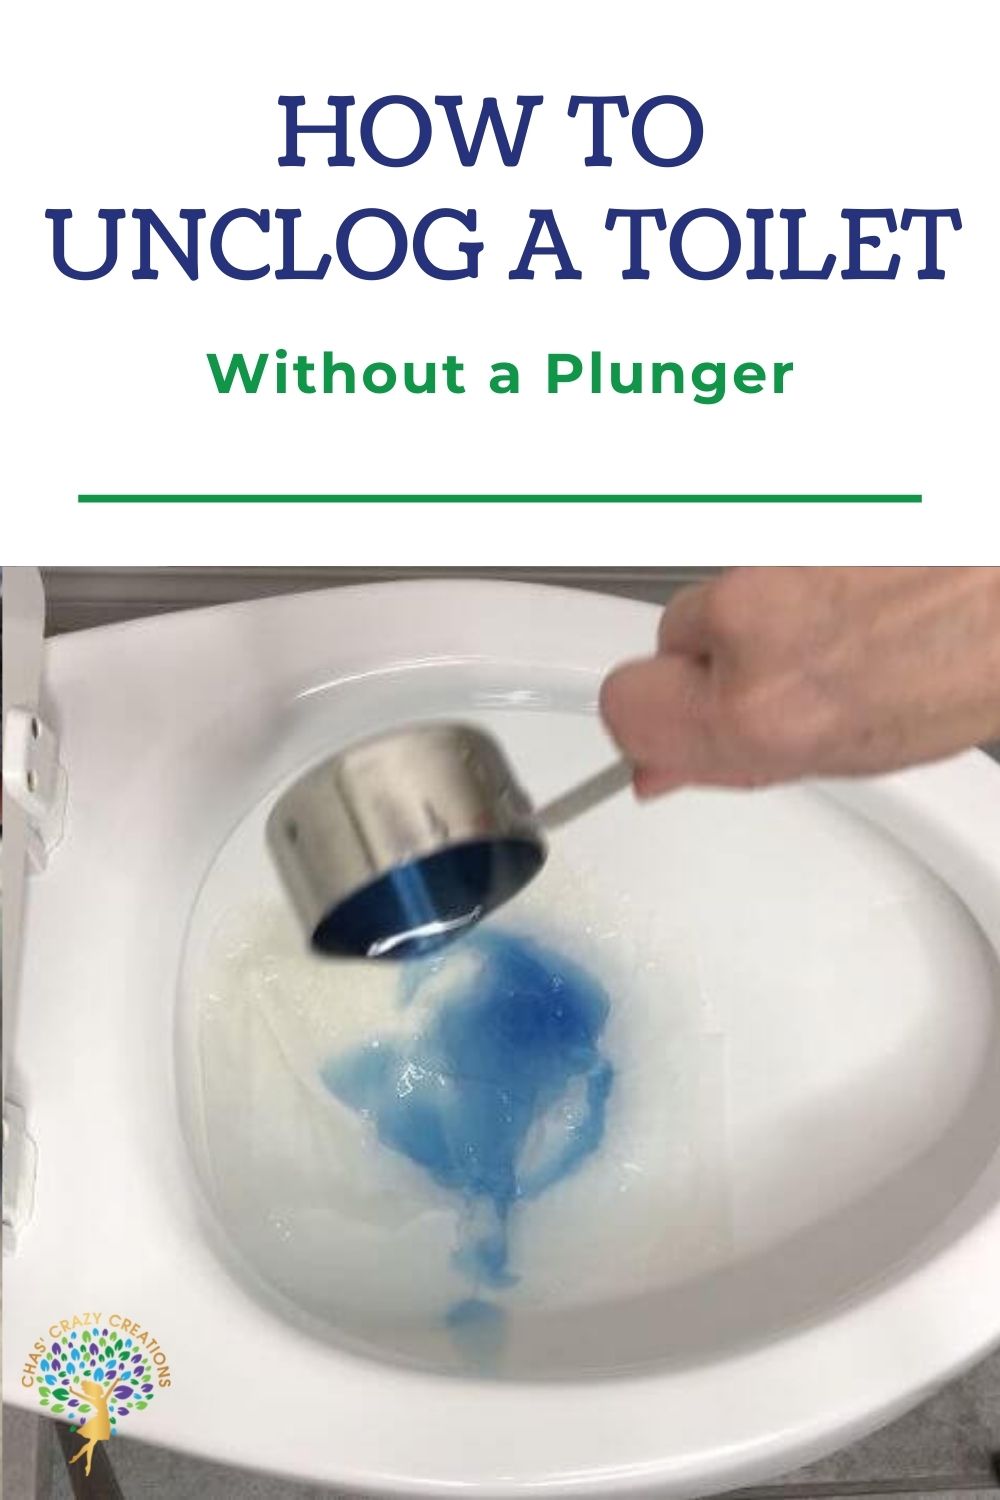 How do you unblock a toilet without a plunger? Sometimes our toilets get blocked from time to time.  I'm going to share how to unclog a toilet without a plunger.  